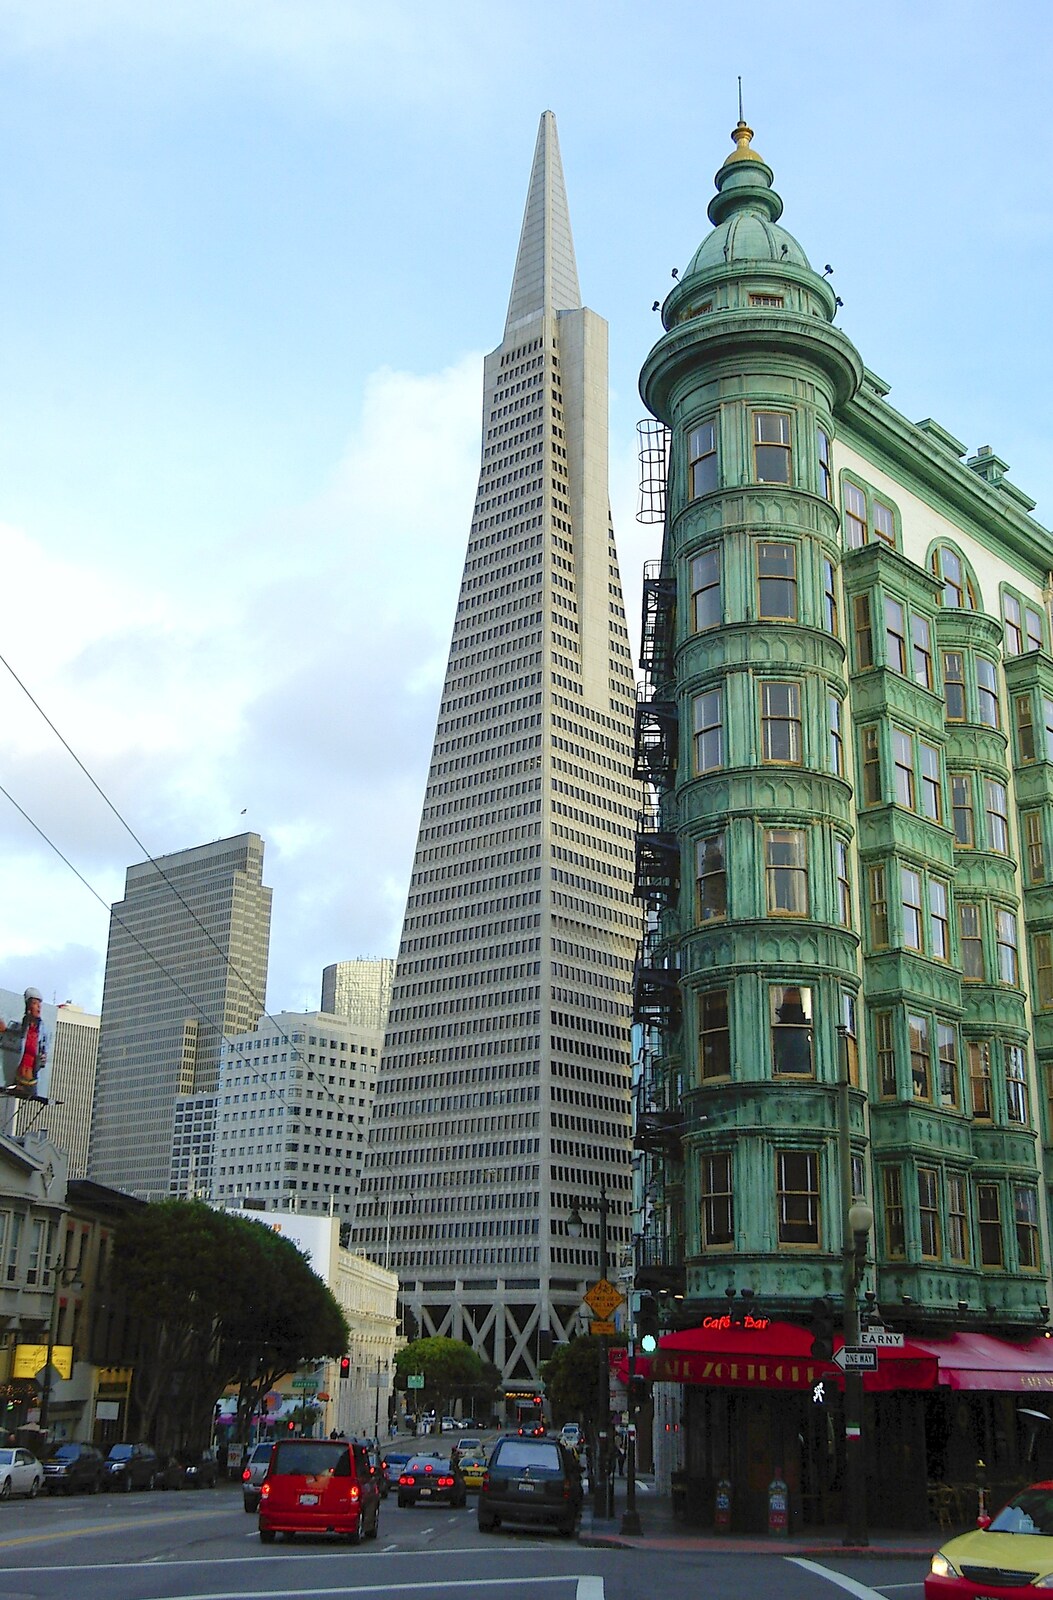 Transamerica - old and new from The Golden Gate Bridge, San Francisco, California, US - 11th March 2006